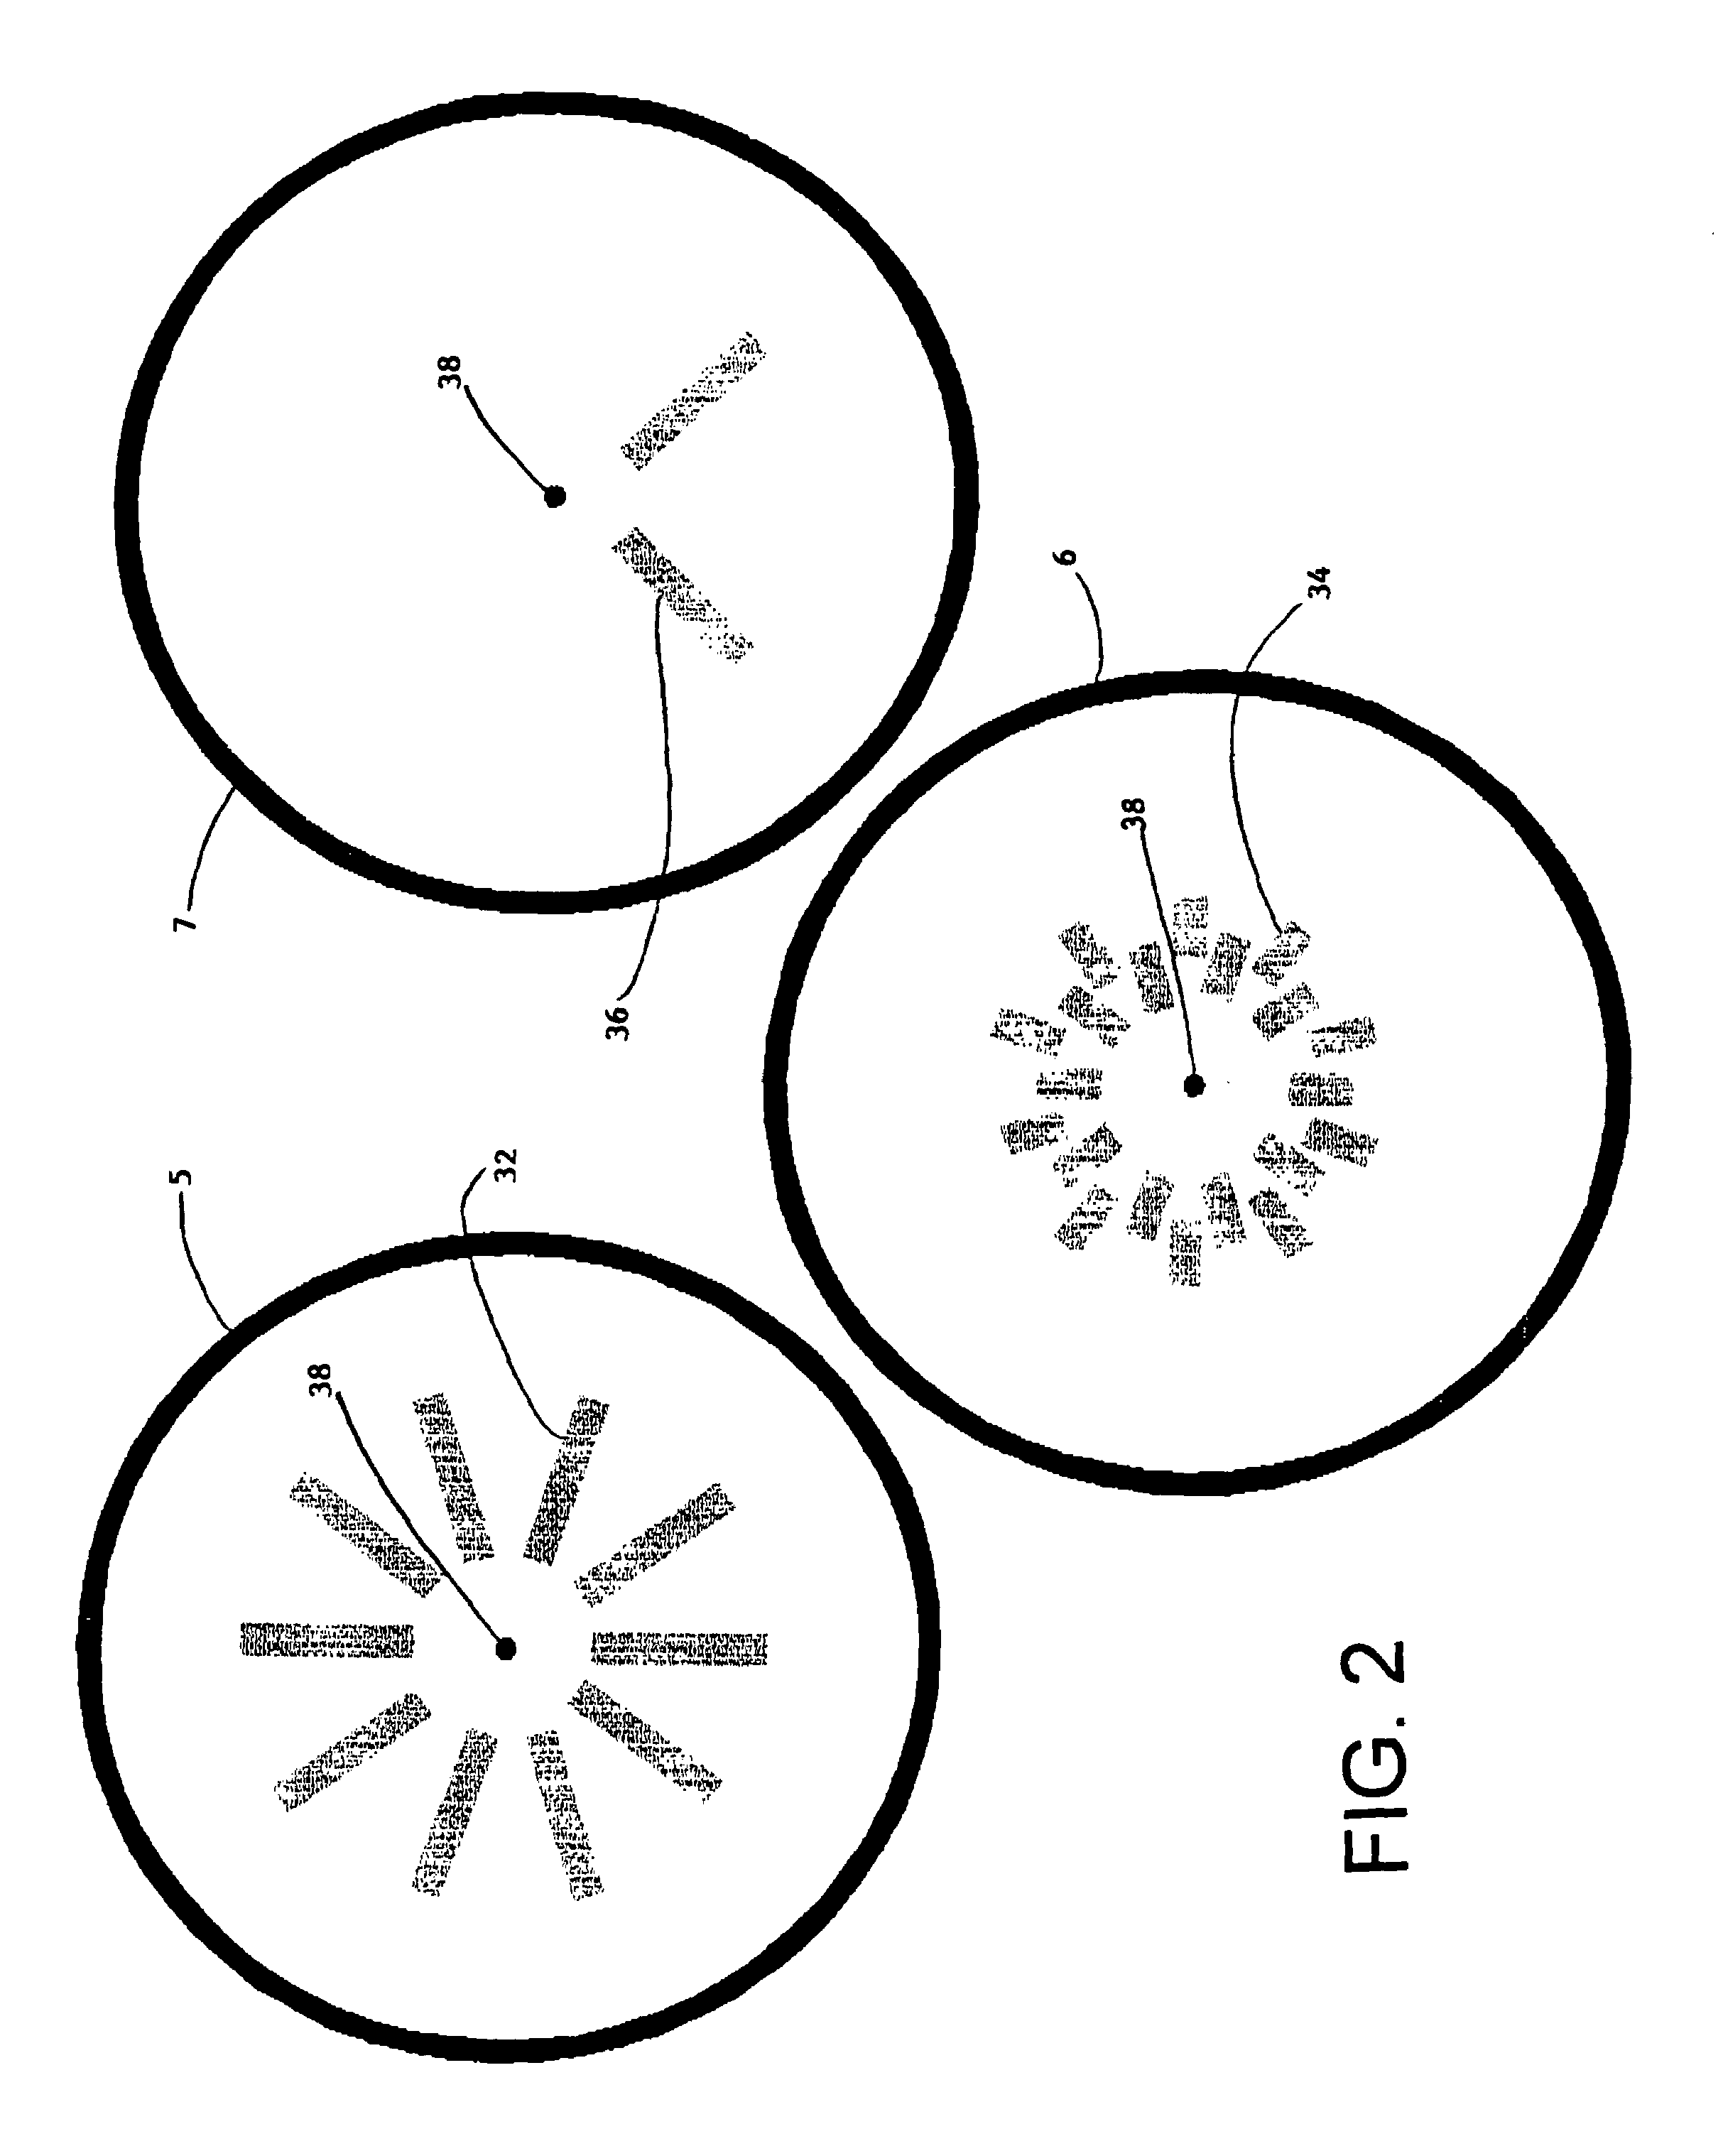 Conformable skin element system for active vortex control